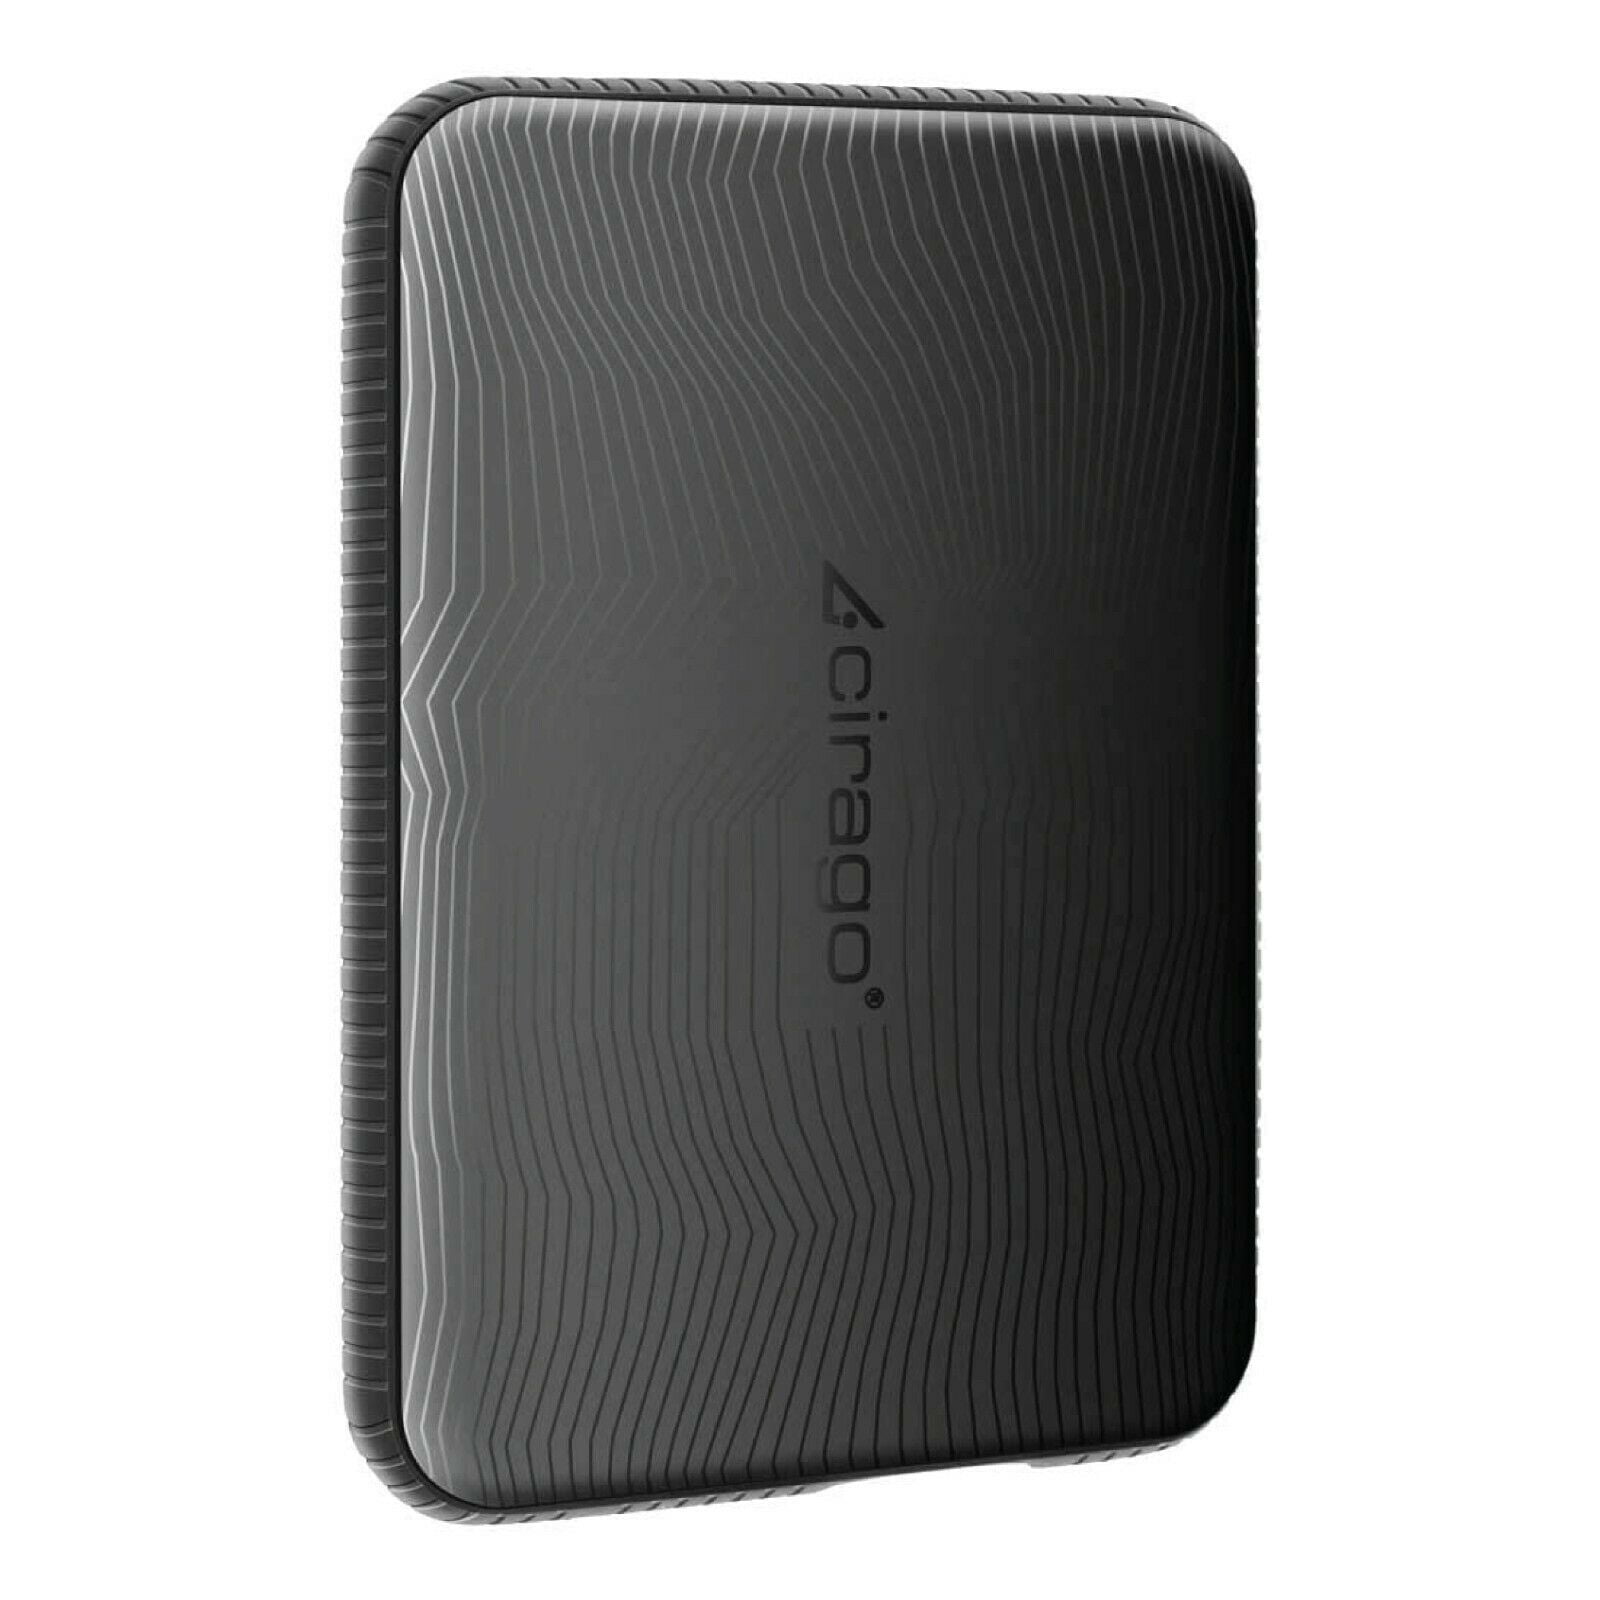 New 250GB External HDD Portable 2.5" USB Hard Drive HDD With Warranty Silver 